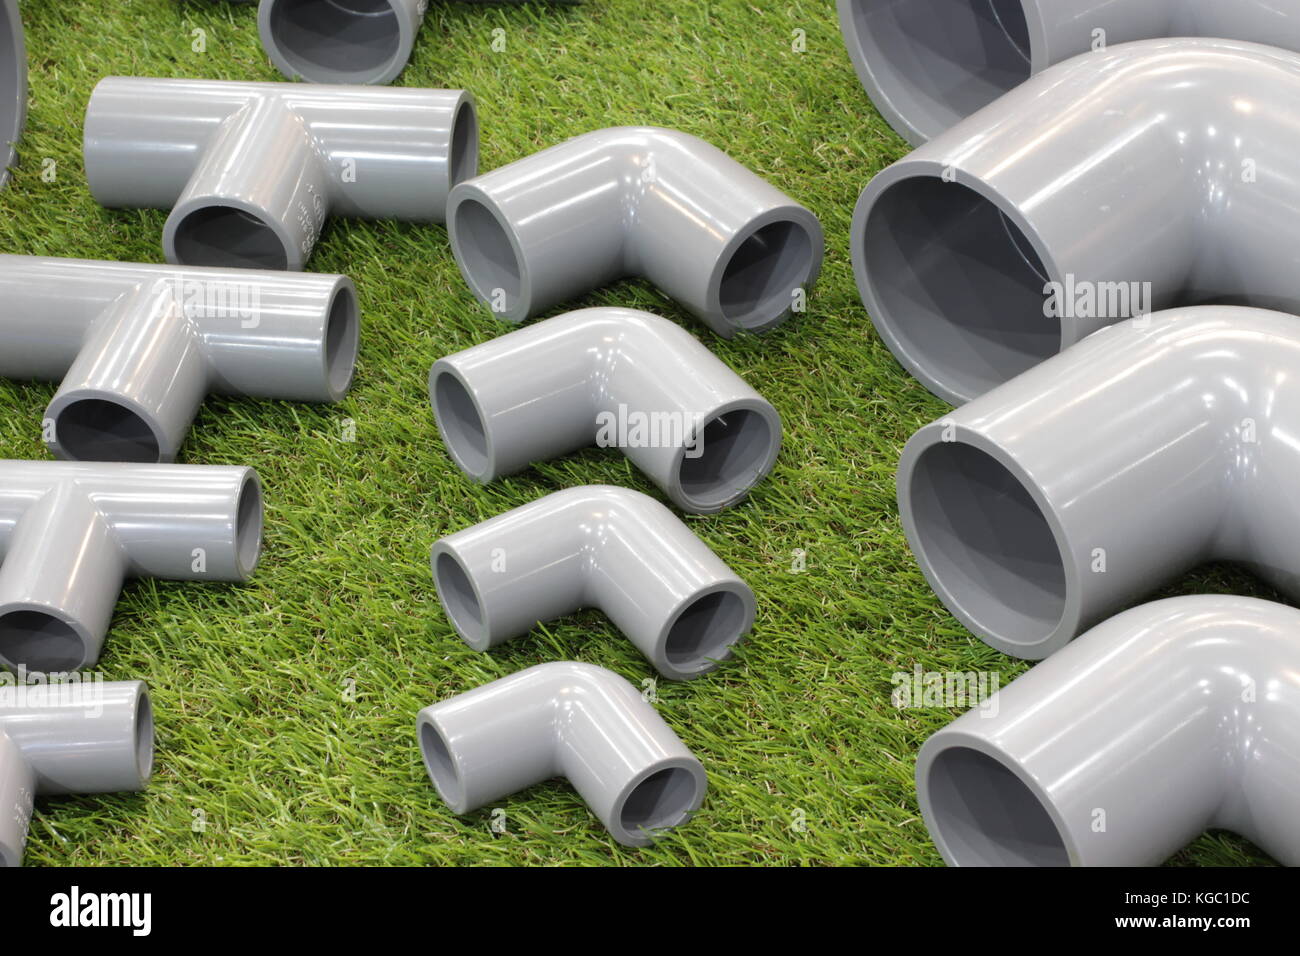 Building Design & Construction - What is Pipe Fittings? Pipe